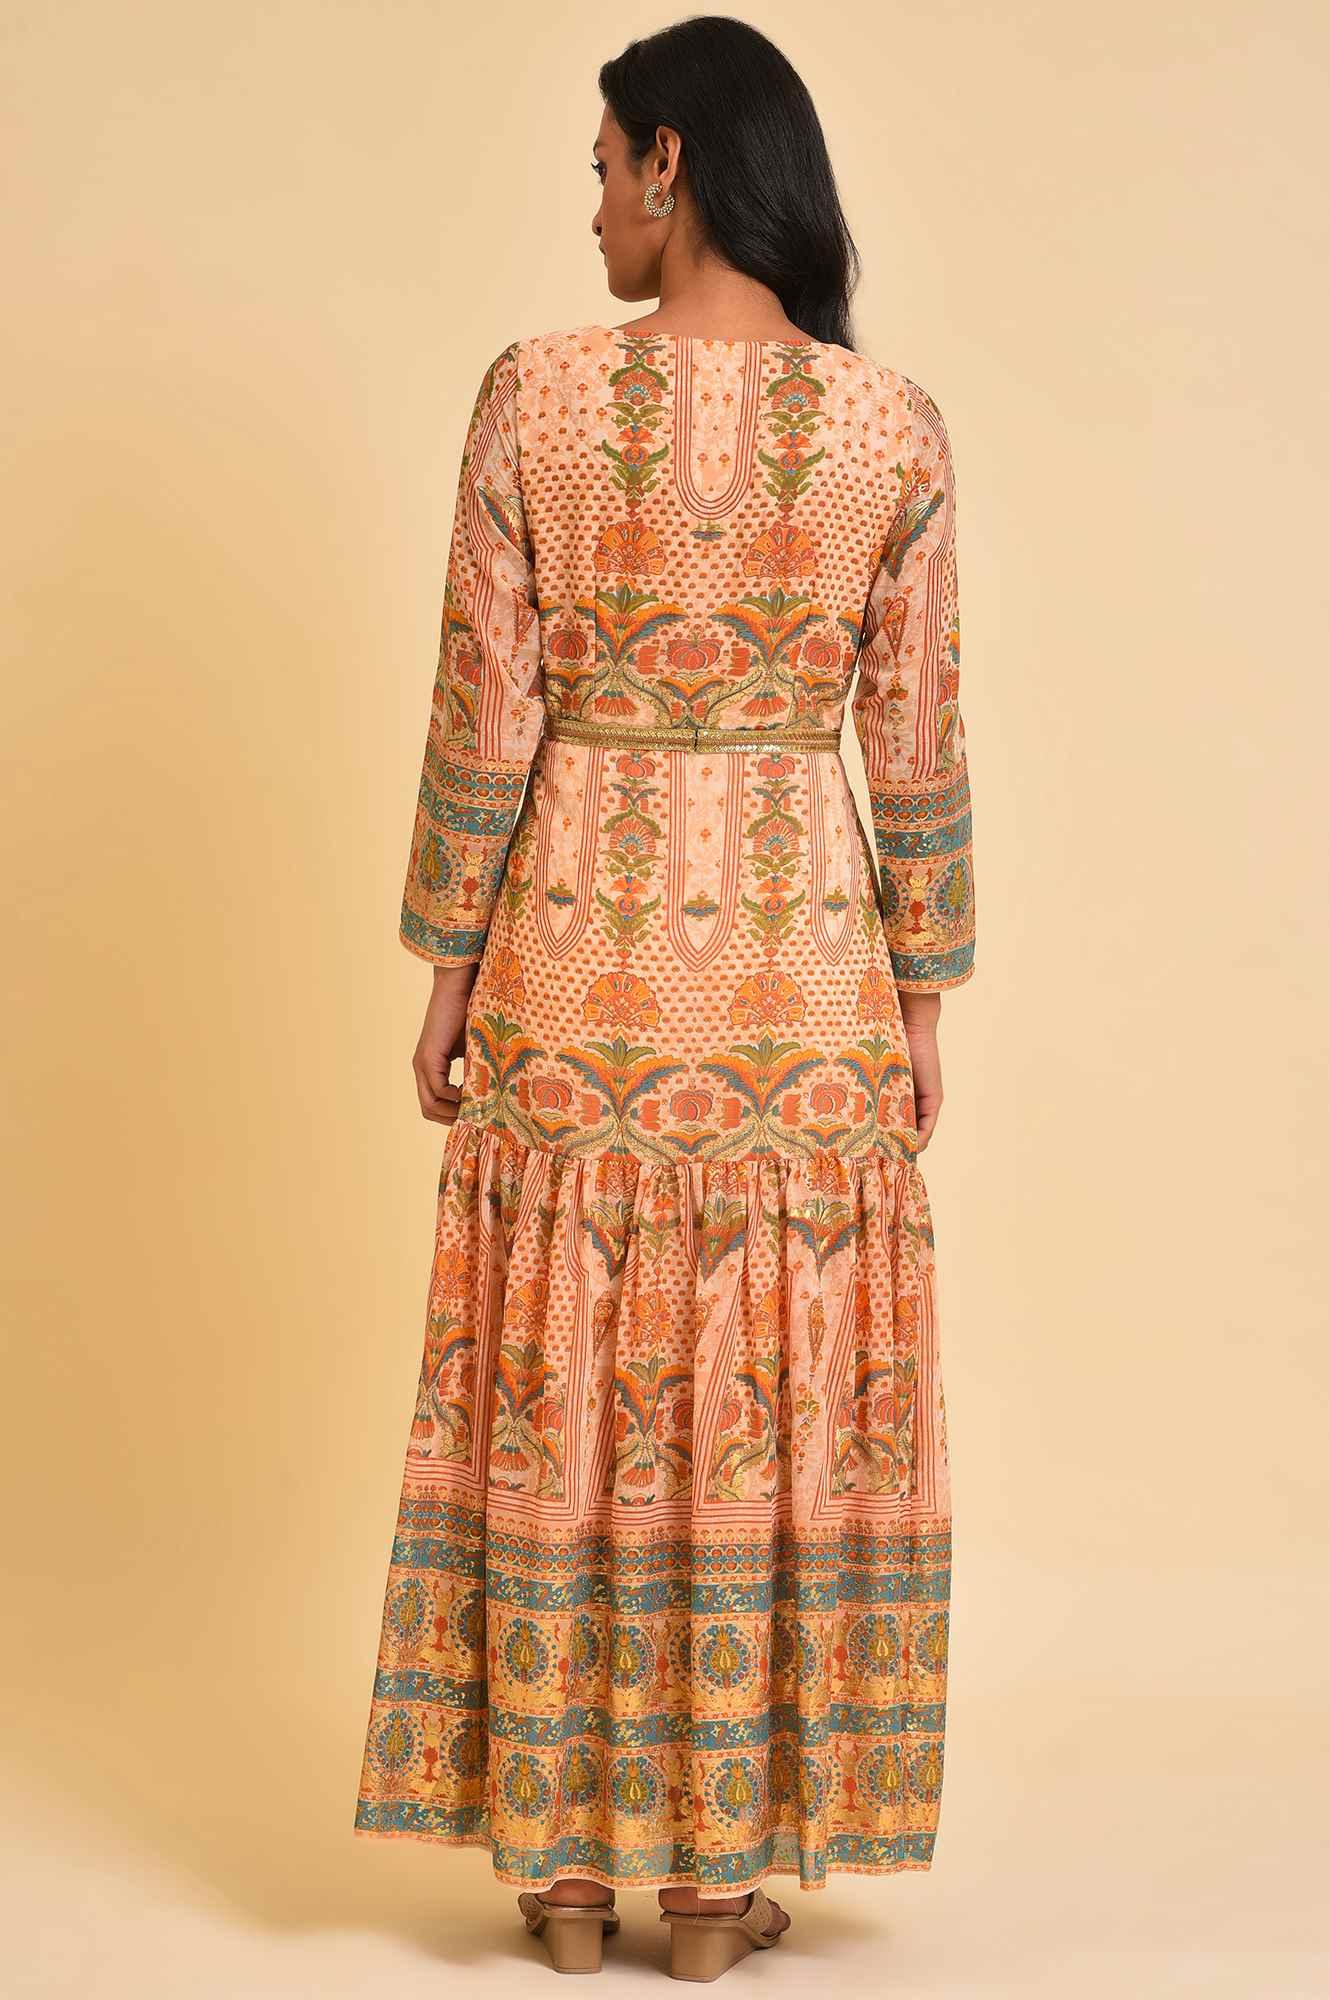 Beige Printed Tiered Dress With Embroidery - wforwoman